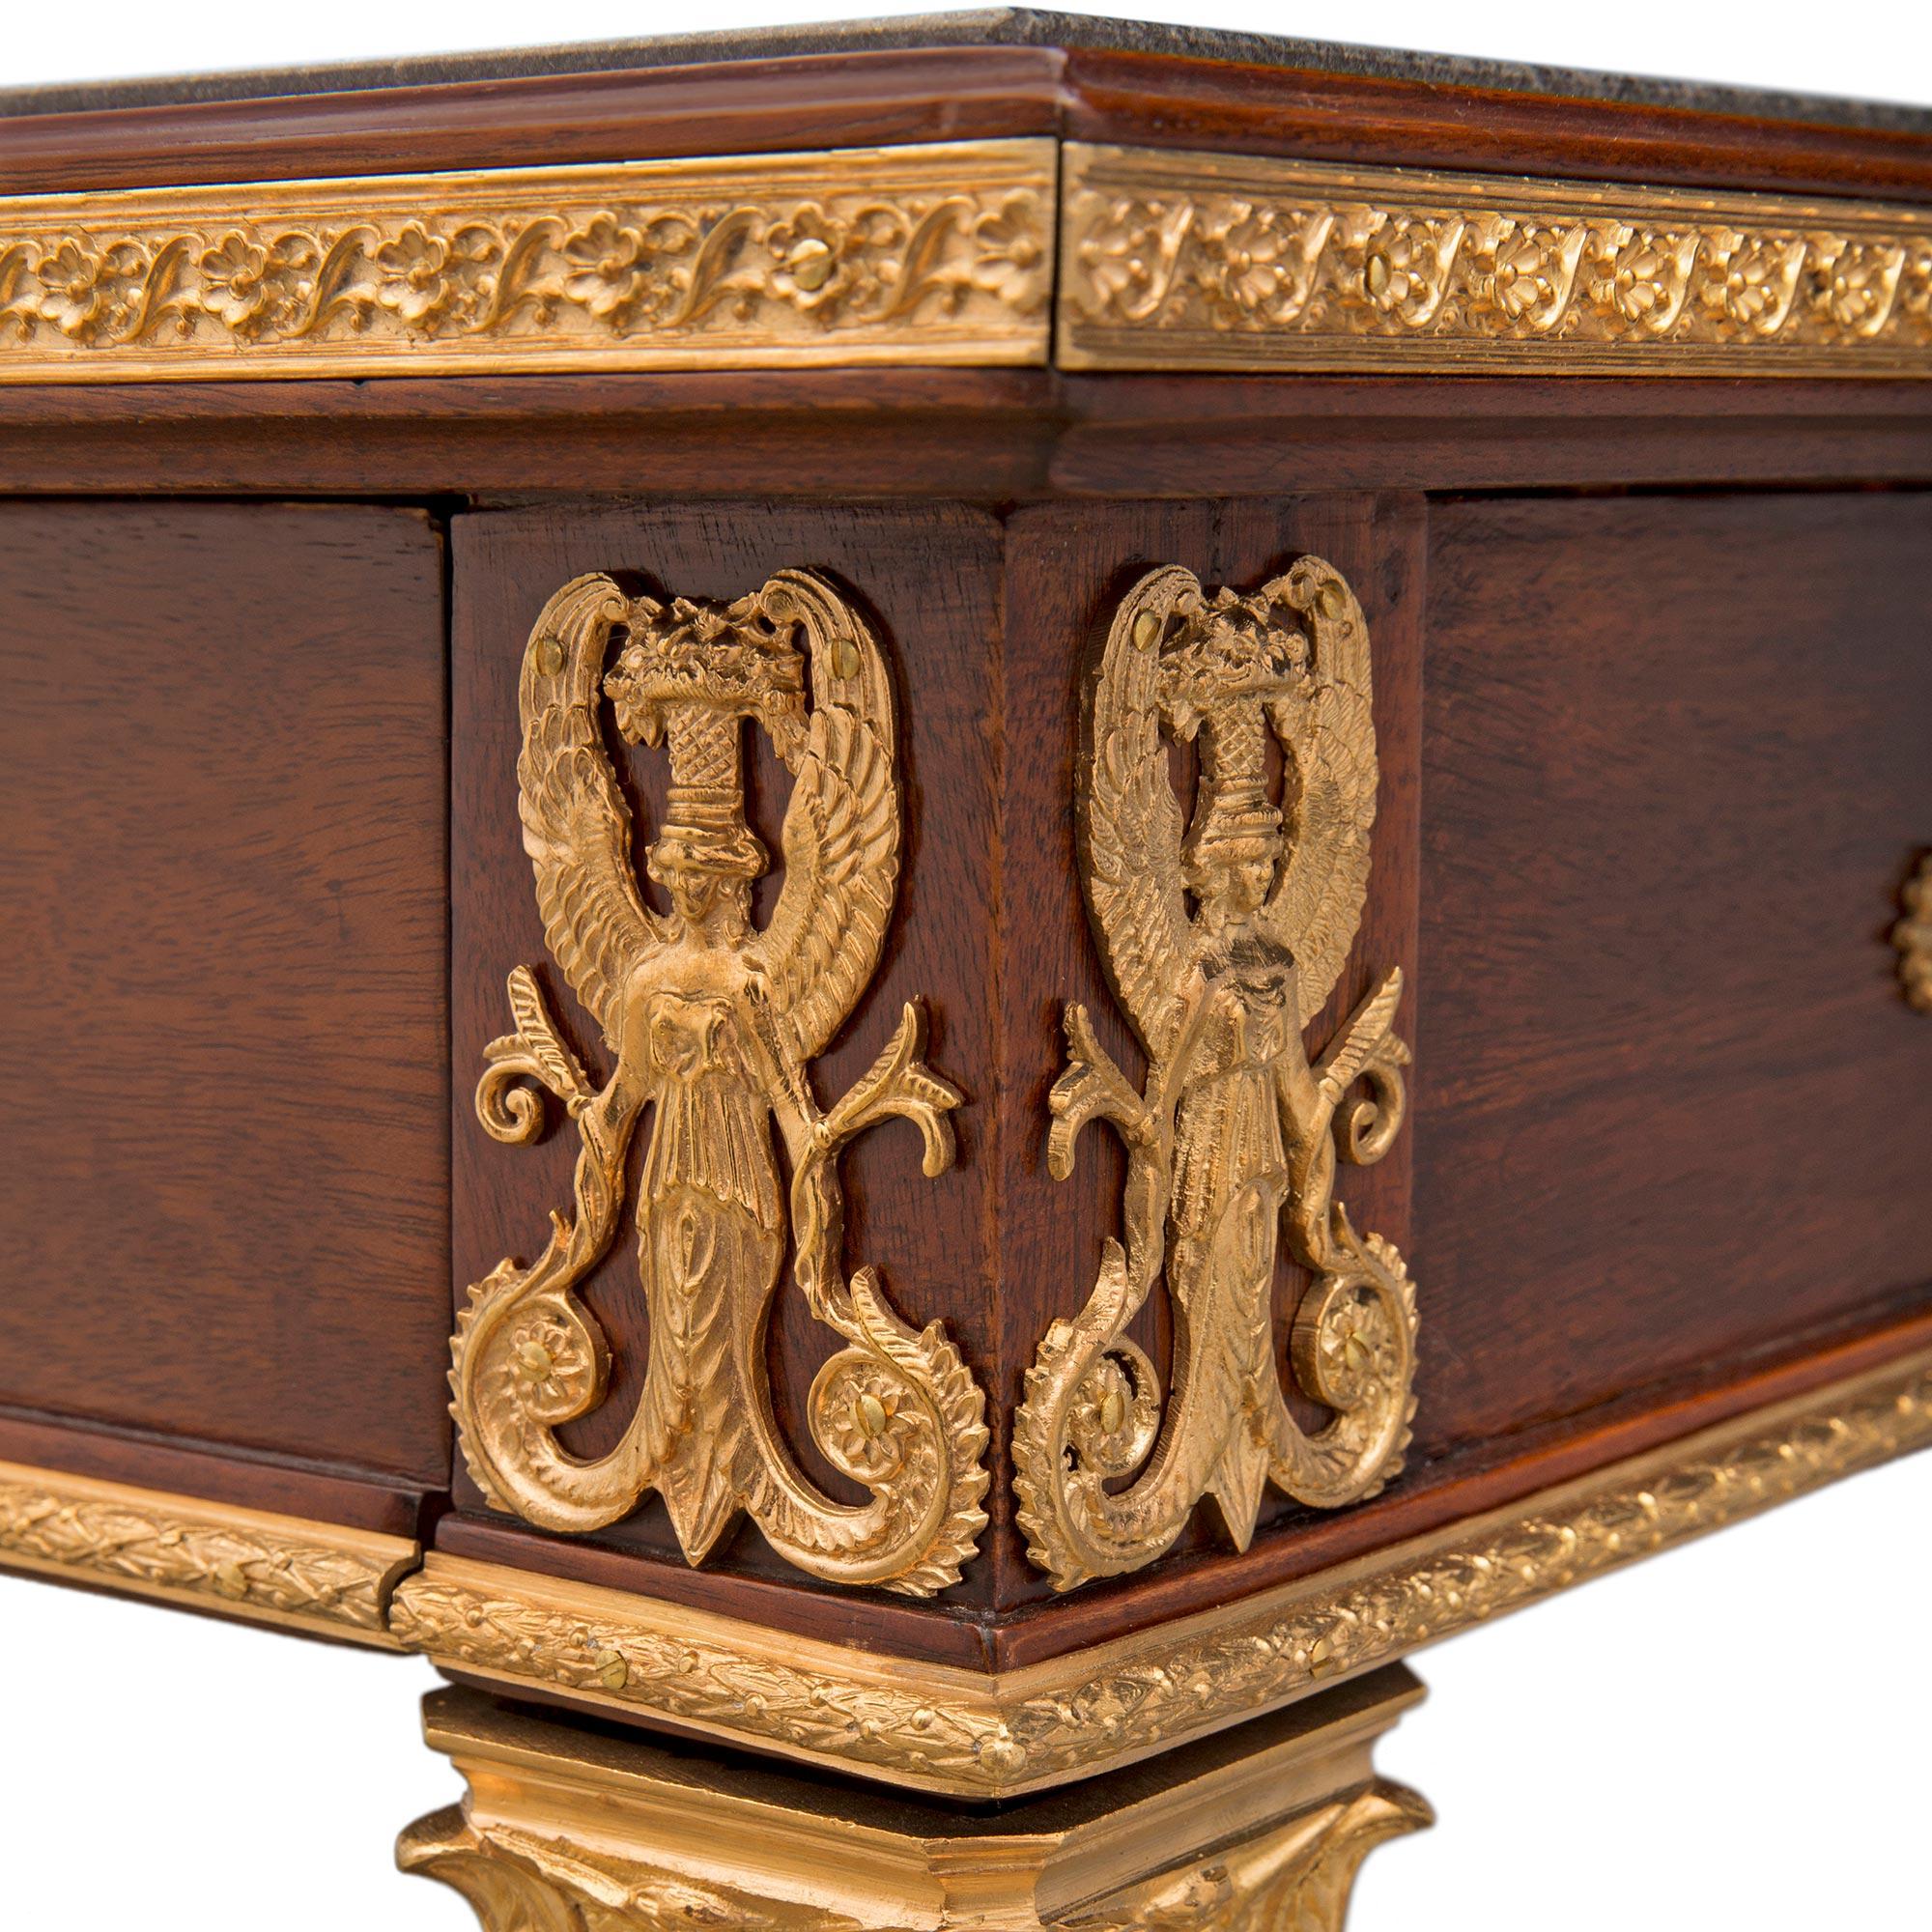 French 19th Century Neoclassical Style Mahogany, Ormolu and Slate Table/Desk For Sale 4